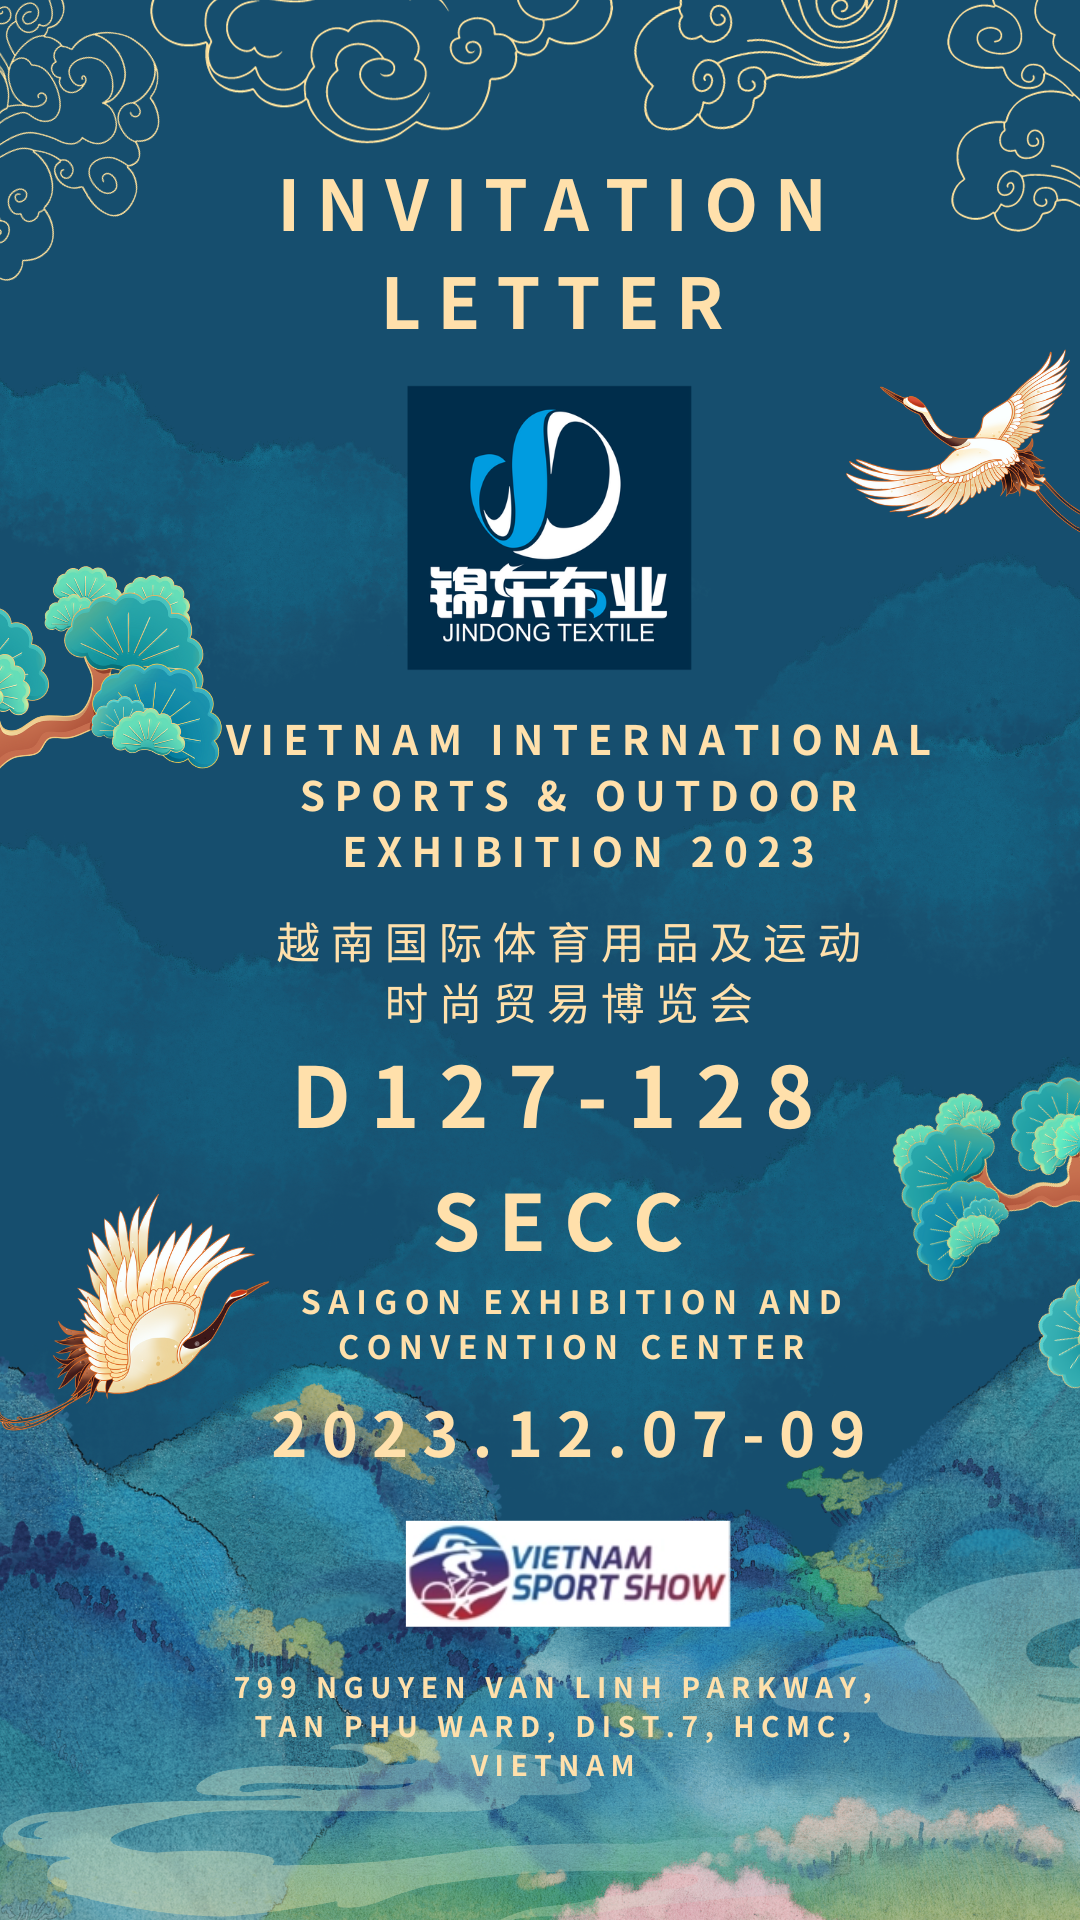 Jingdong Textile Invite You to Visit Our Booth at the Upcoming Vietnam International Sports & Outdoor Exhibition 2023